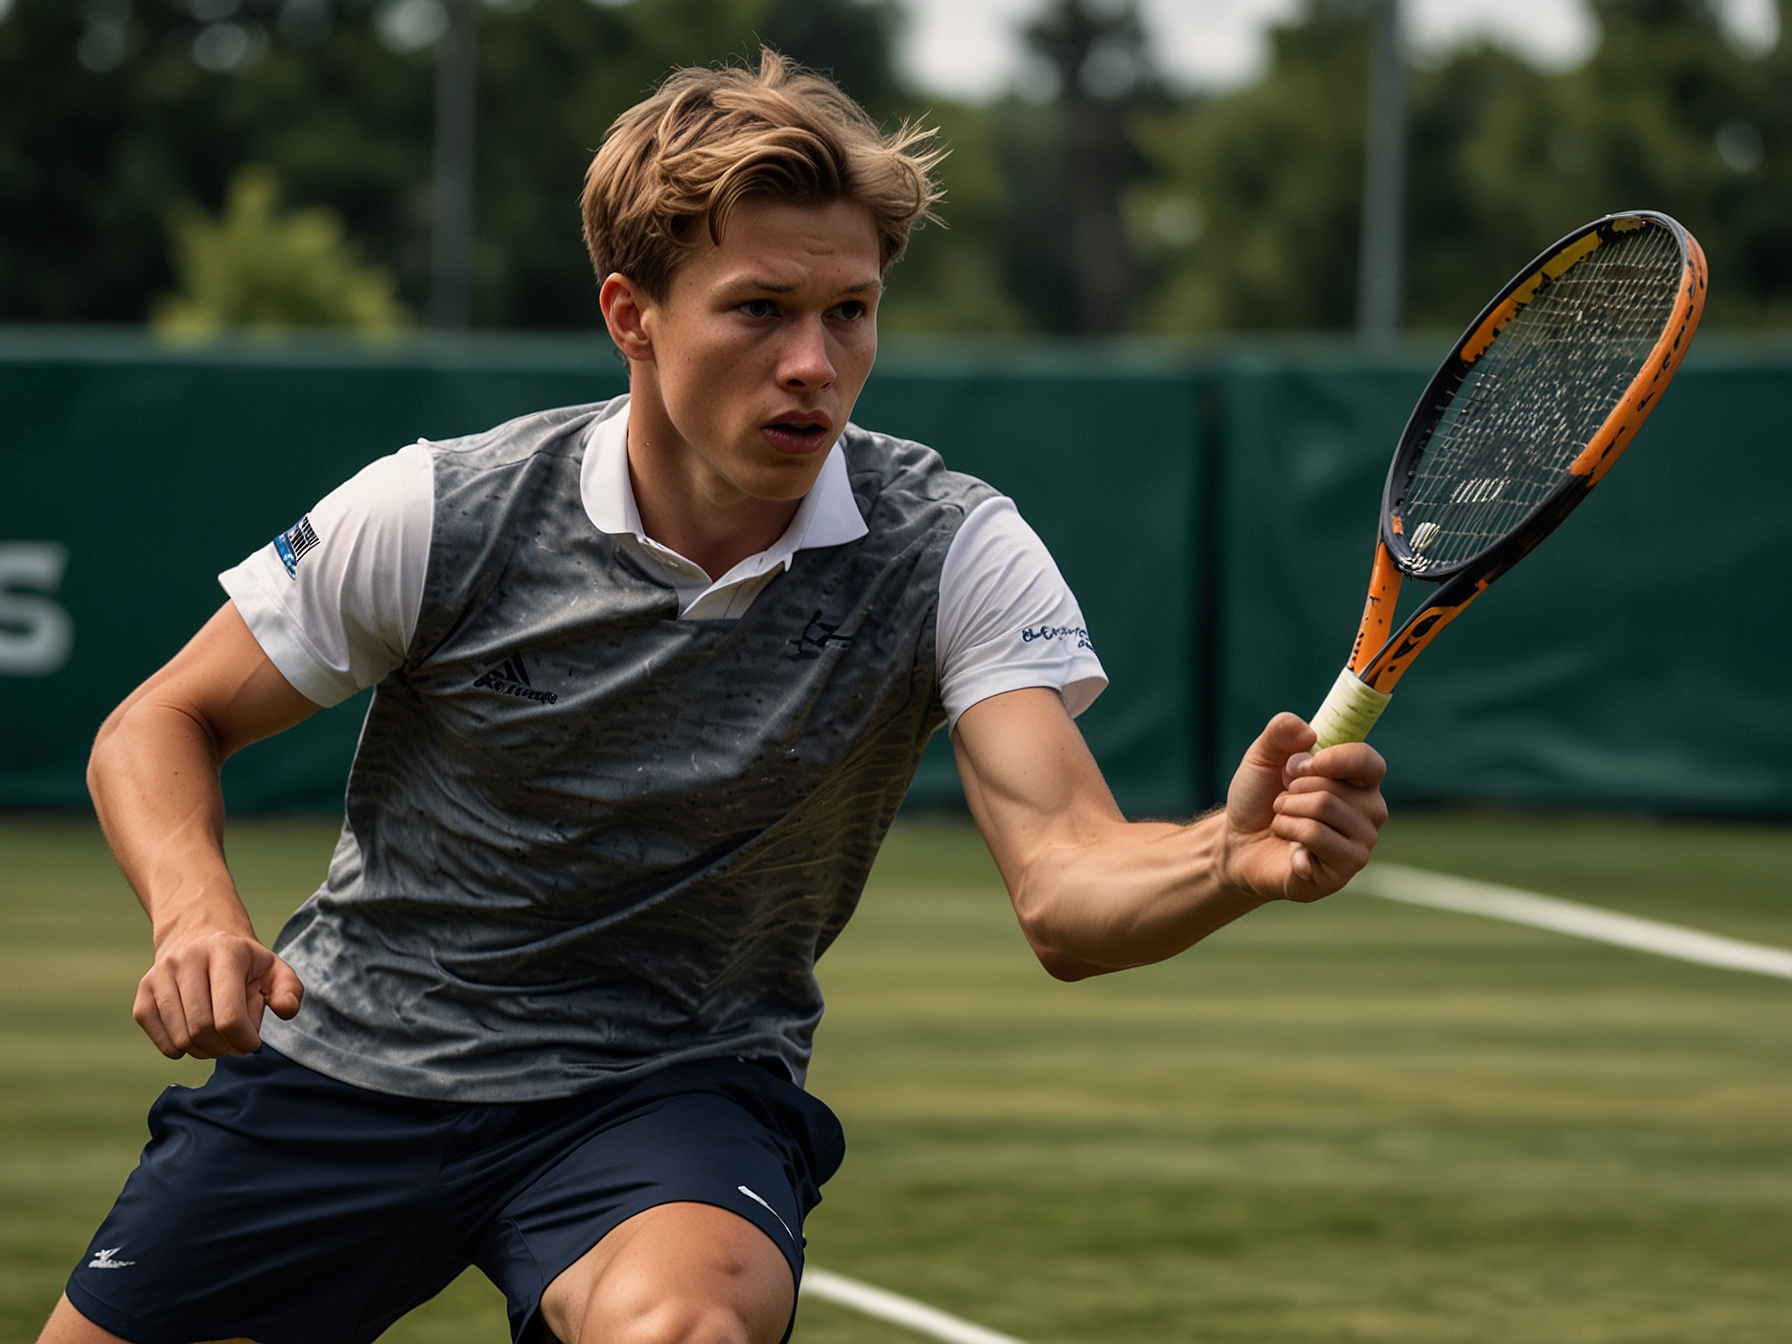 Image of Jannik Sinner in an intense match on a grass court, showcasing his exceptional footwork and balance, attributes believed to be influenced by his background in skiing.